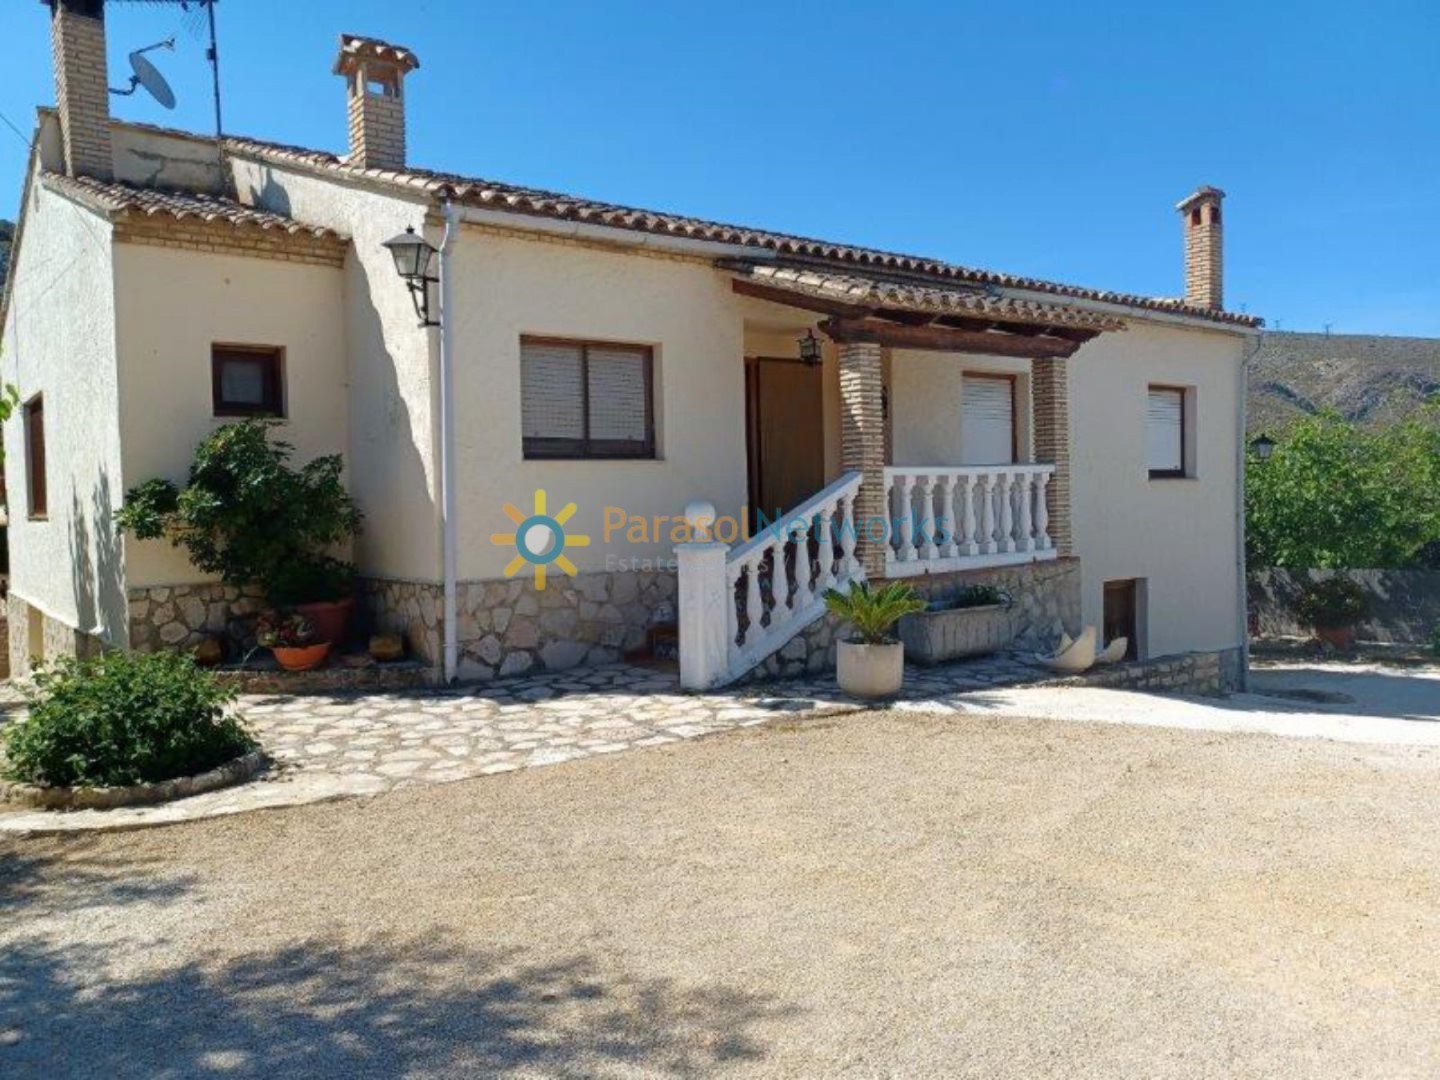 Villa for sale in Ontinyent- Ref:3370